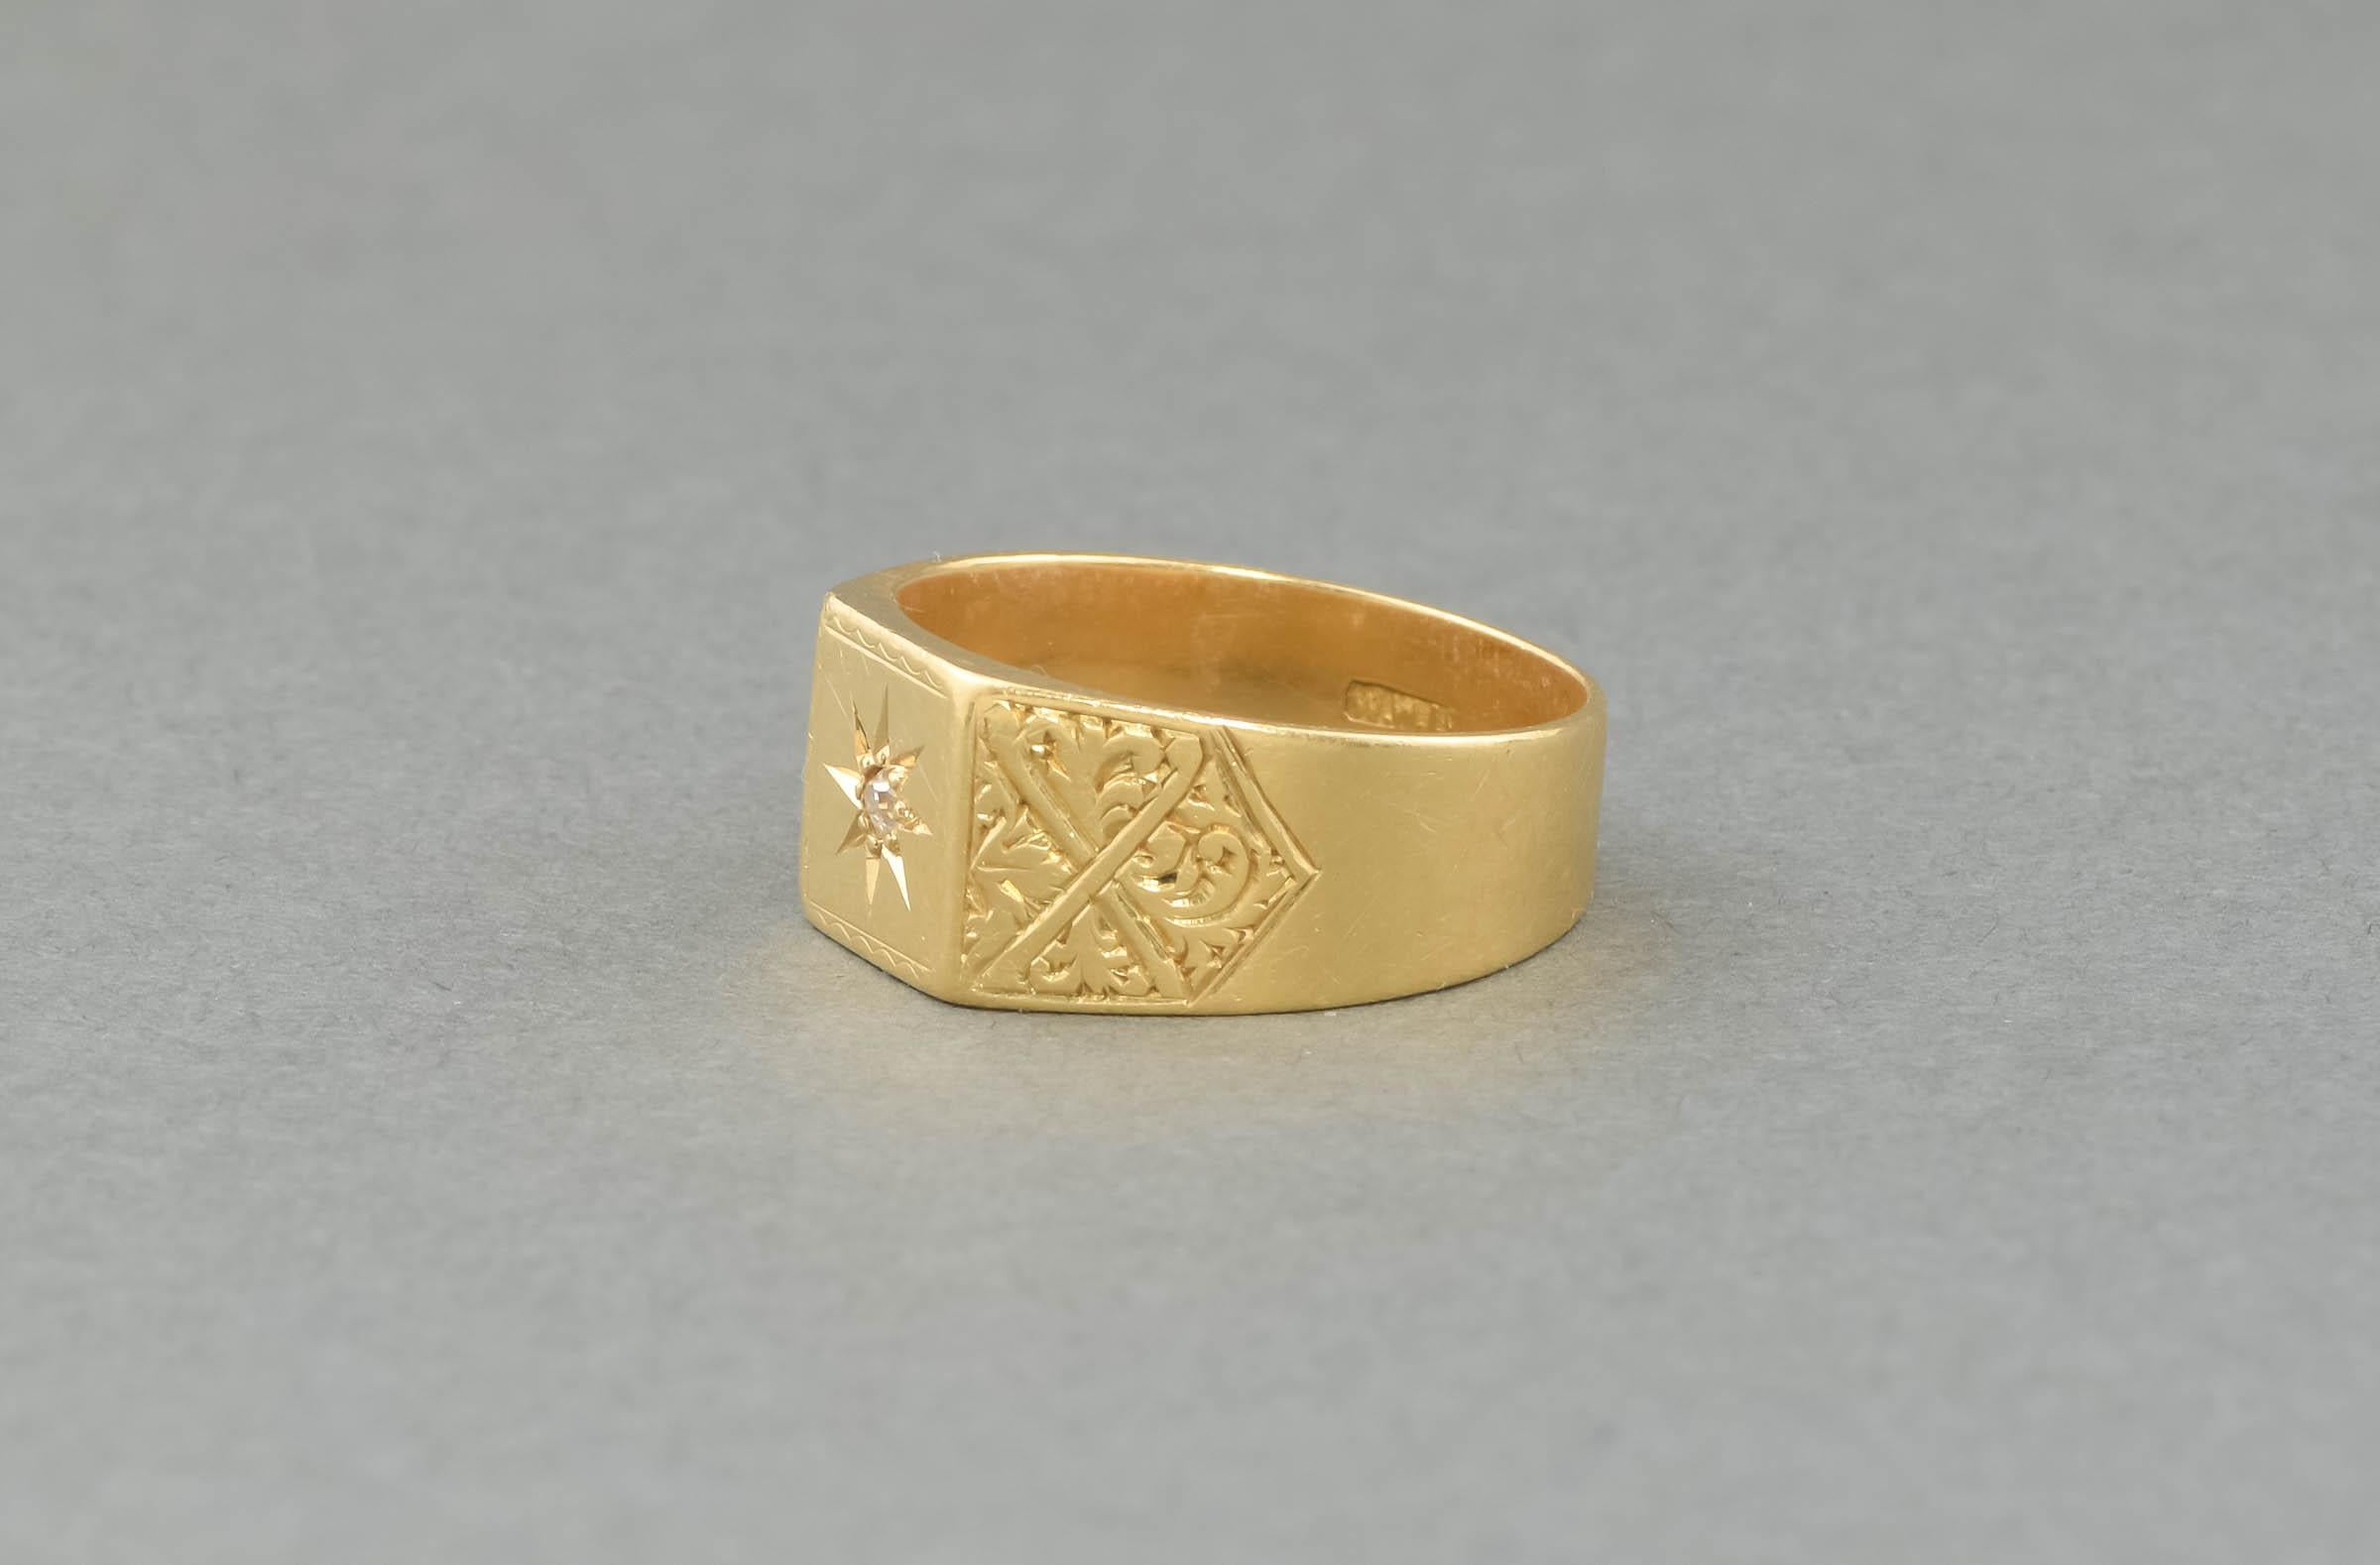 18K Gold Diamond Star Signet Ring with Engraved Shoulders, hallmarked 1929 2